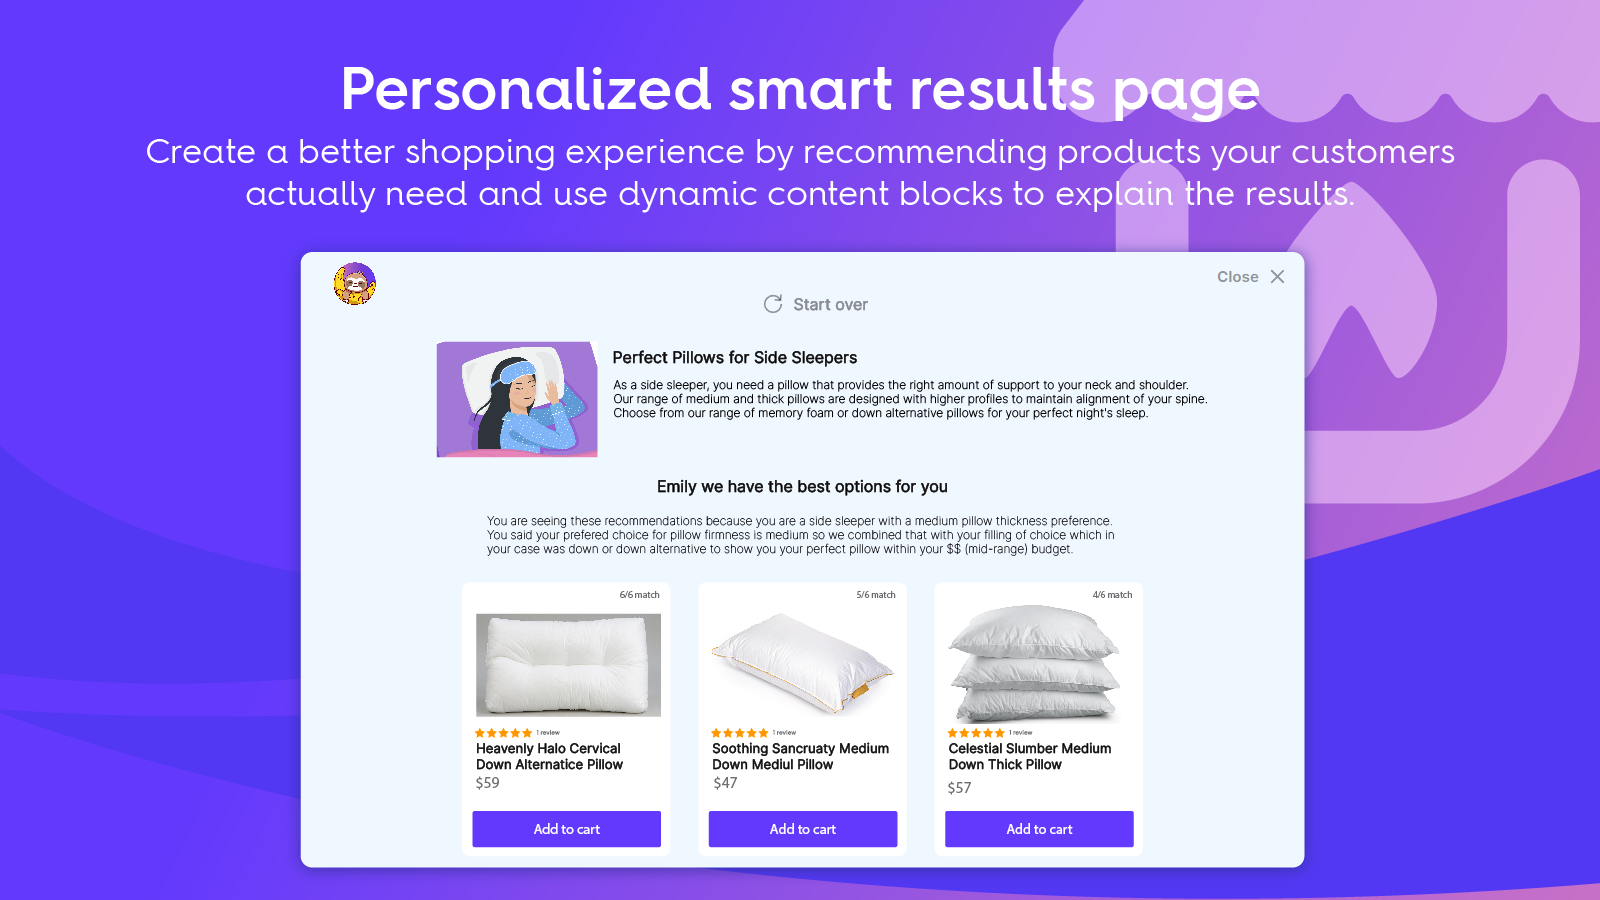 Personalized smart results page with dynamic block data